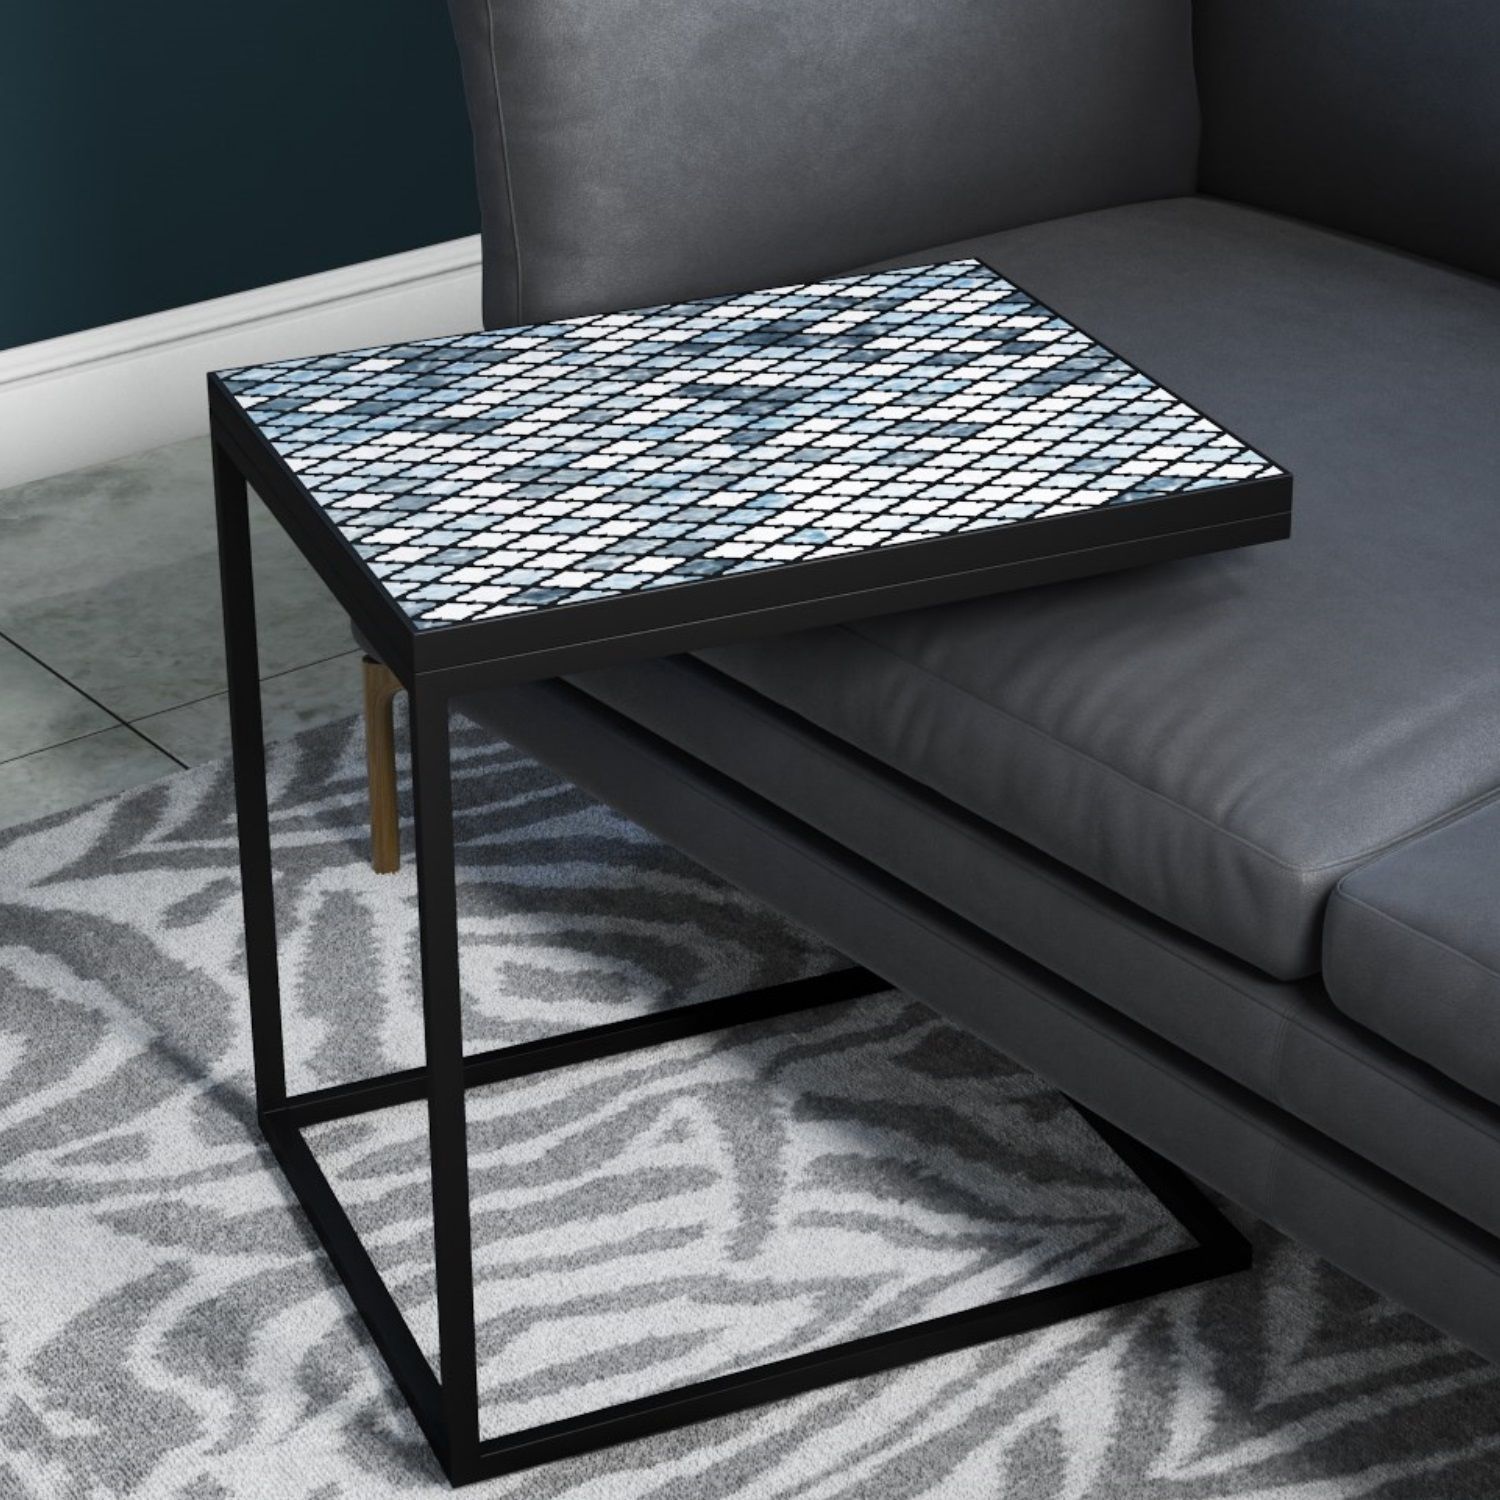 Black And White Industrial Metal Sofa Table In 2020 Inside Black And White Console Tables (View 13 of 20)